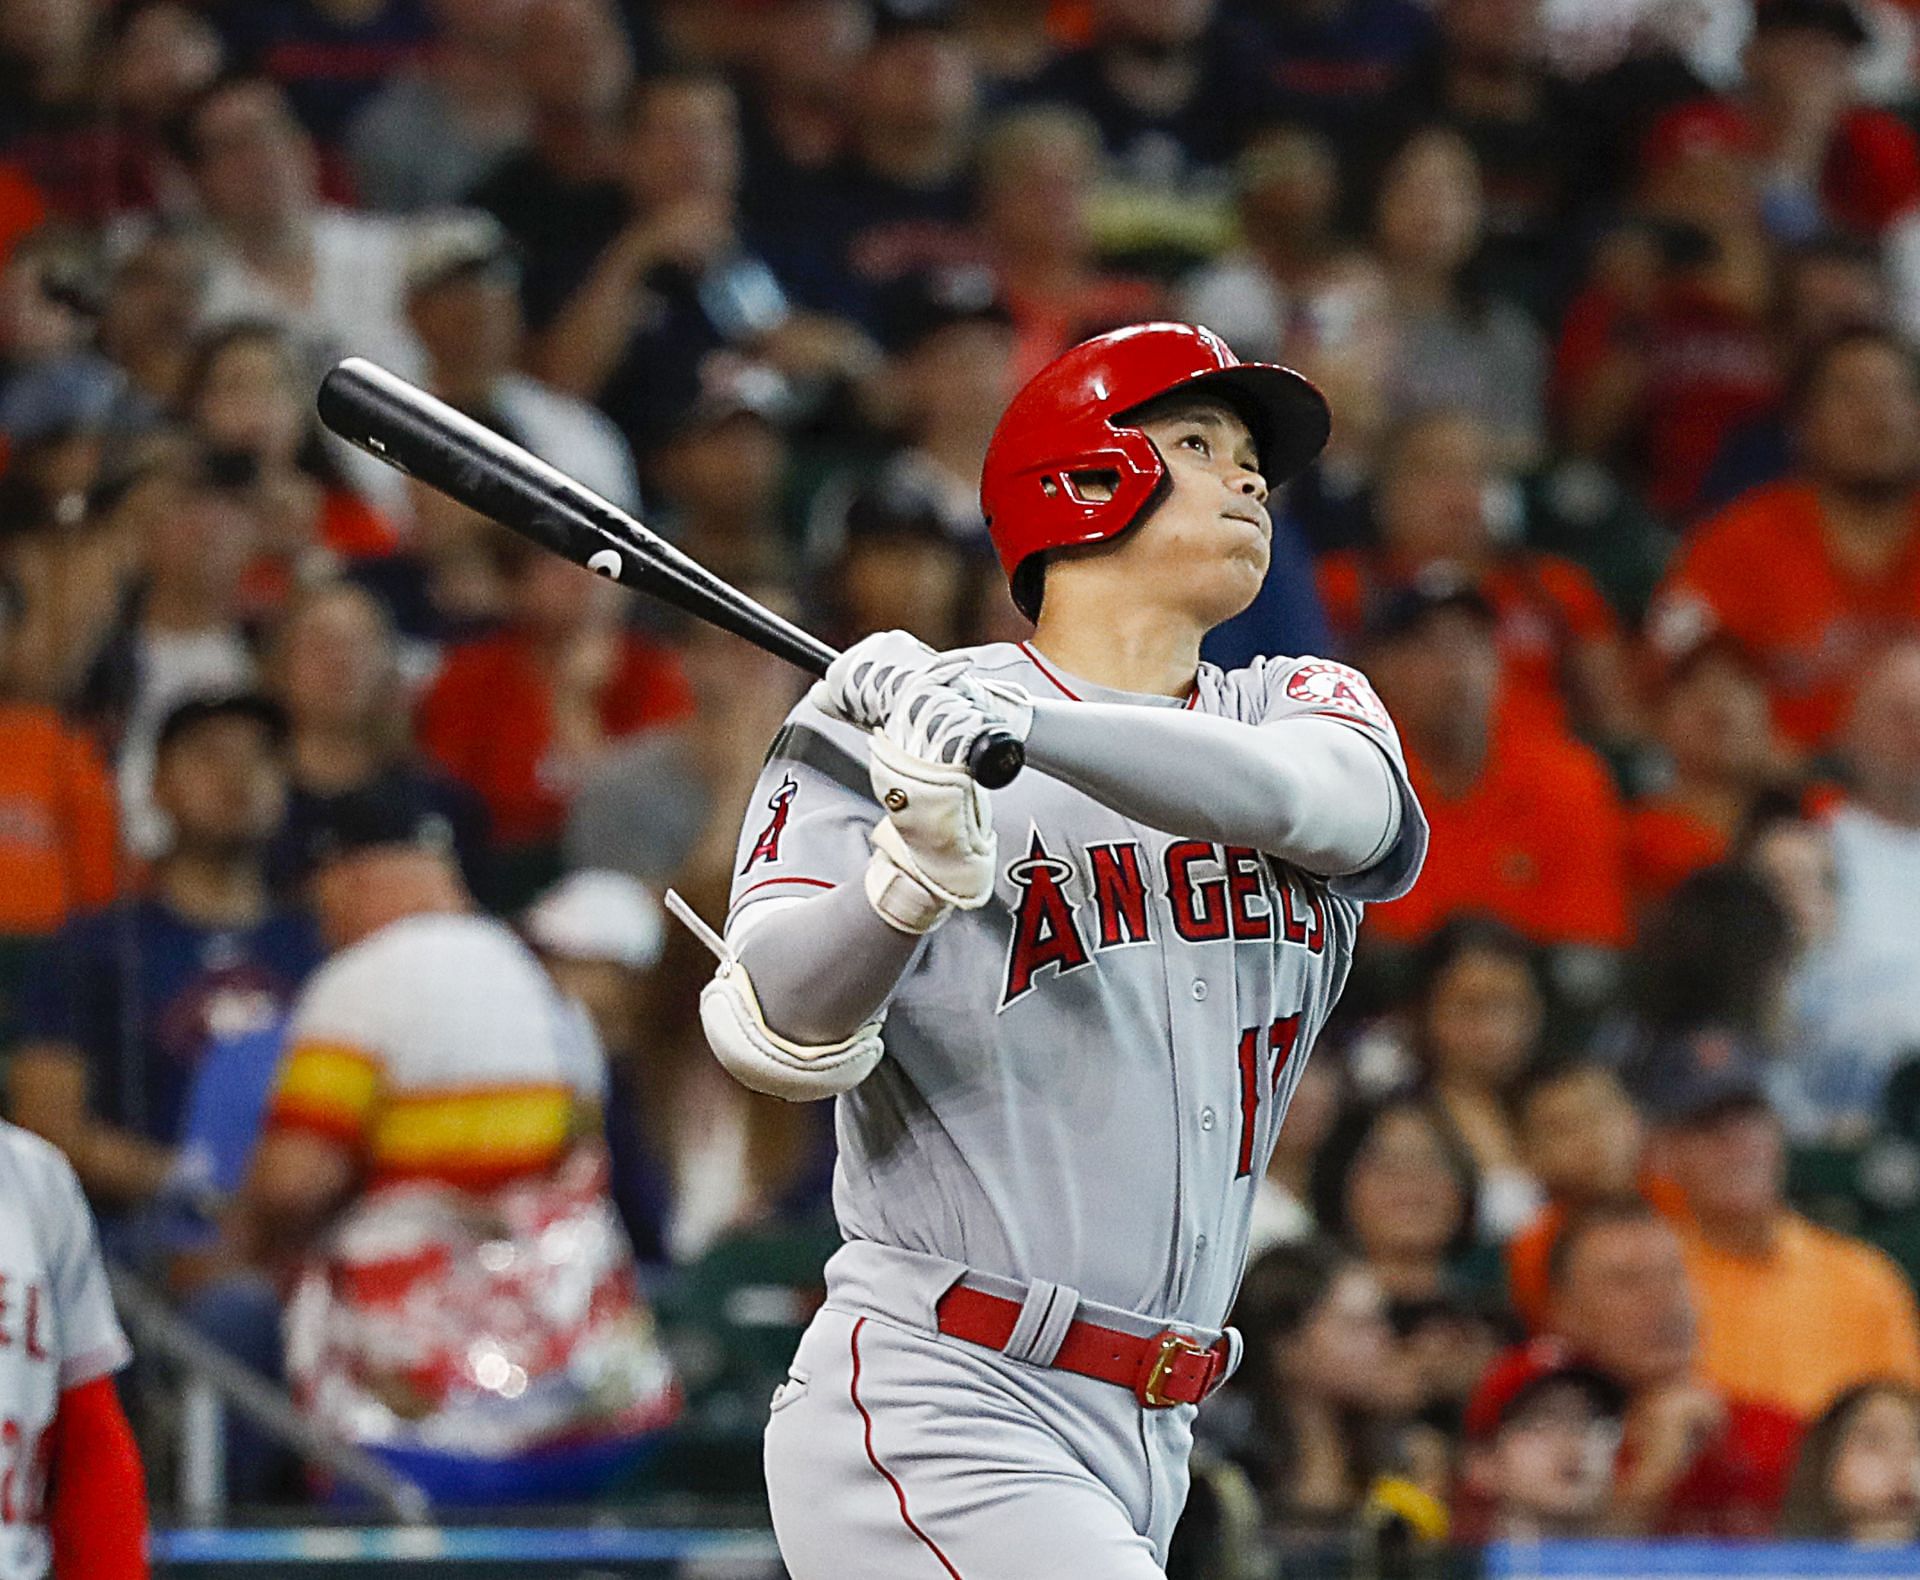 Ohtani #17 of the Los Angeles Angels hits a home run in the first inning at Minute Maid Park.